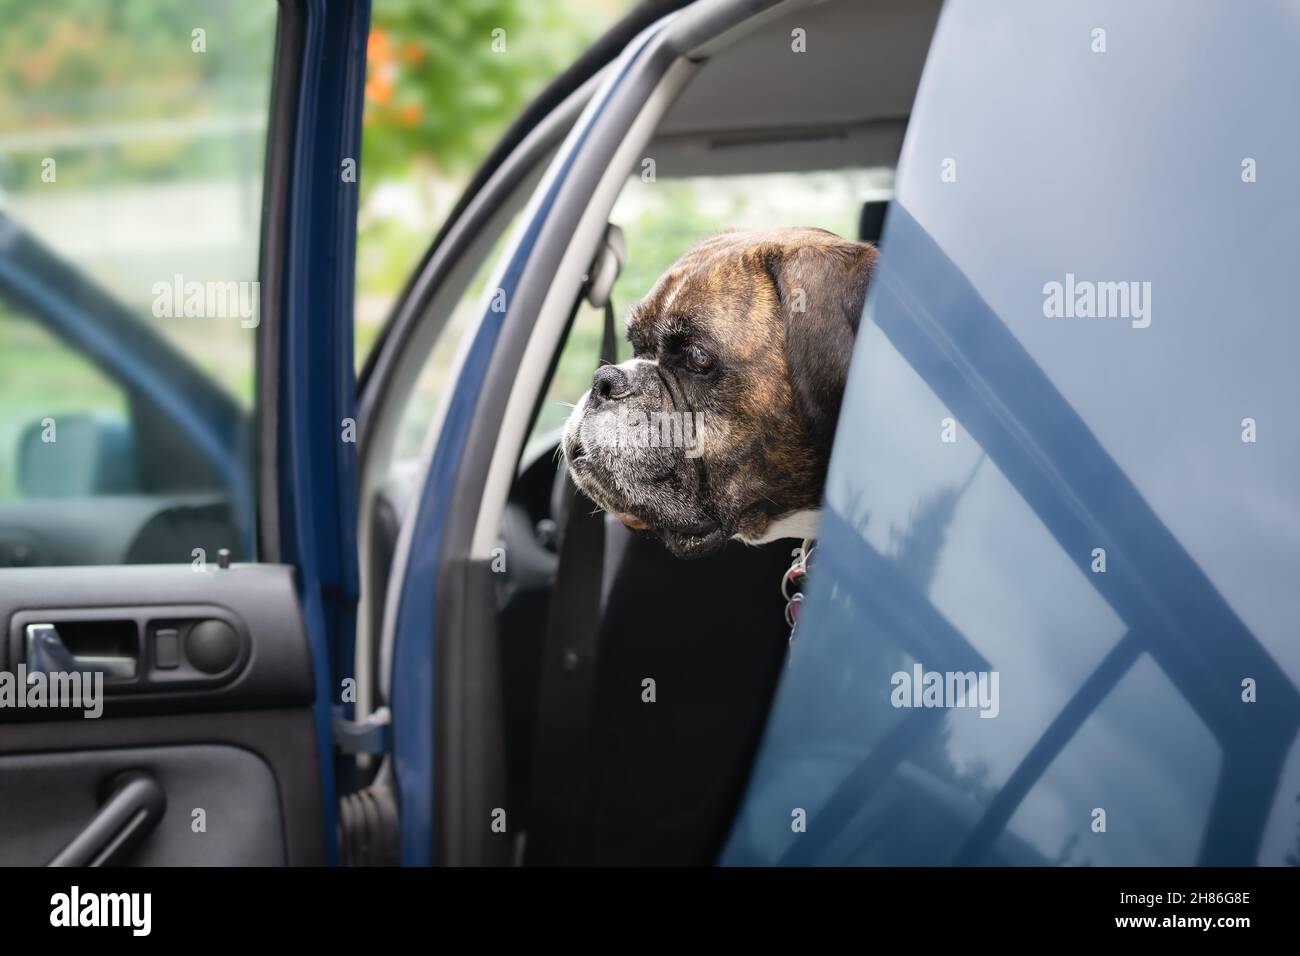 Dog waiting in car ready for travel or a trip. Sideview of a female brindle boxer dog sitting in the backseat of a small car with doors open, while lo Stock Photo